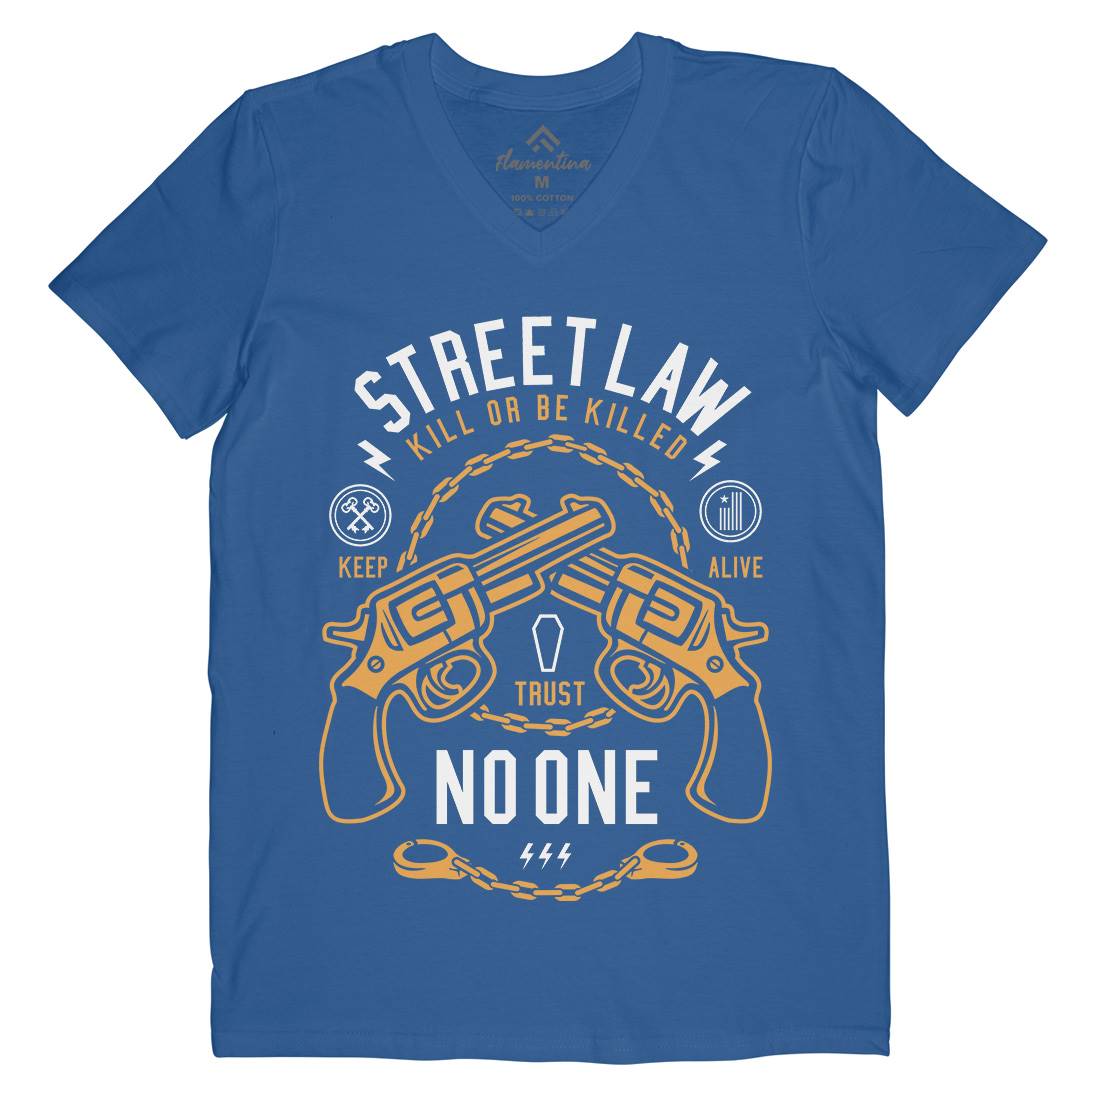 Street Law Mens V-Neck T-Shirt Quotes A286